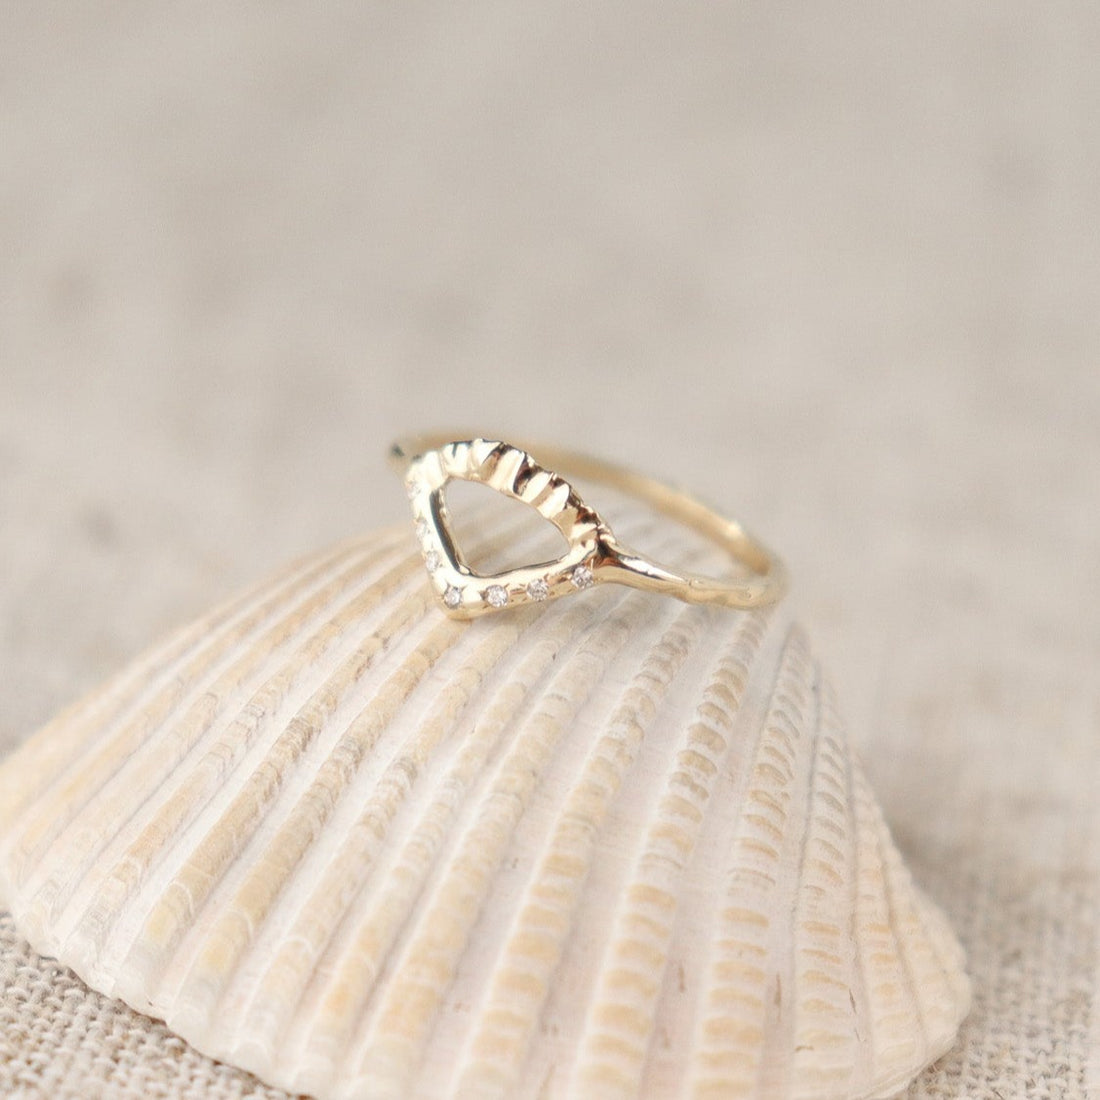 Elegant gold ring with V-shaped diamond detail and arched fin texture.